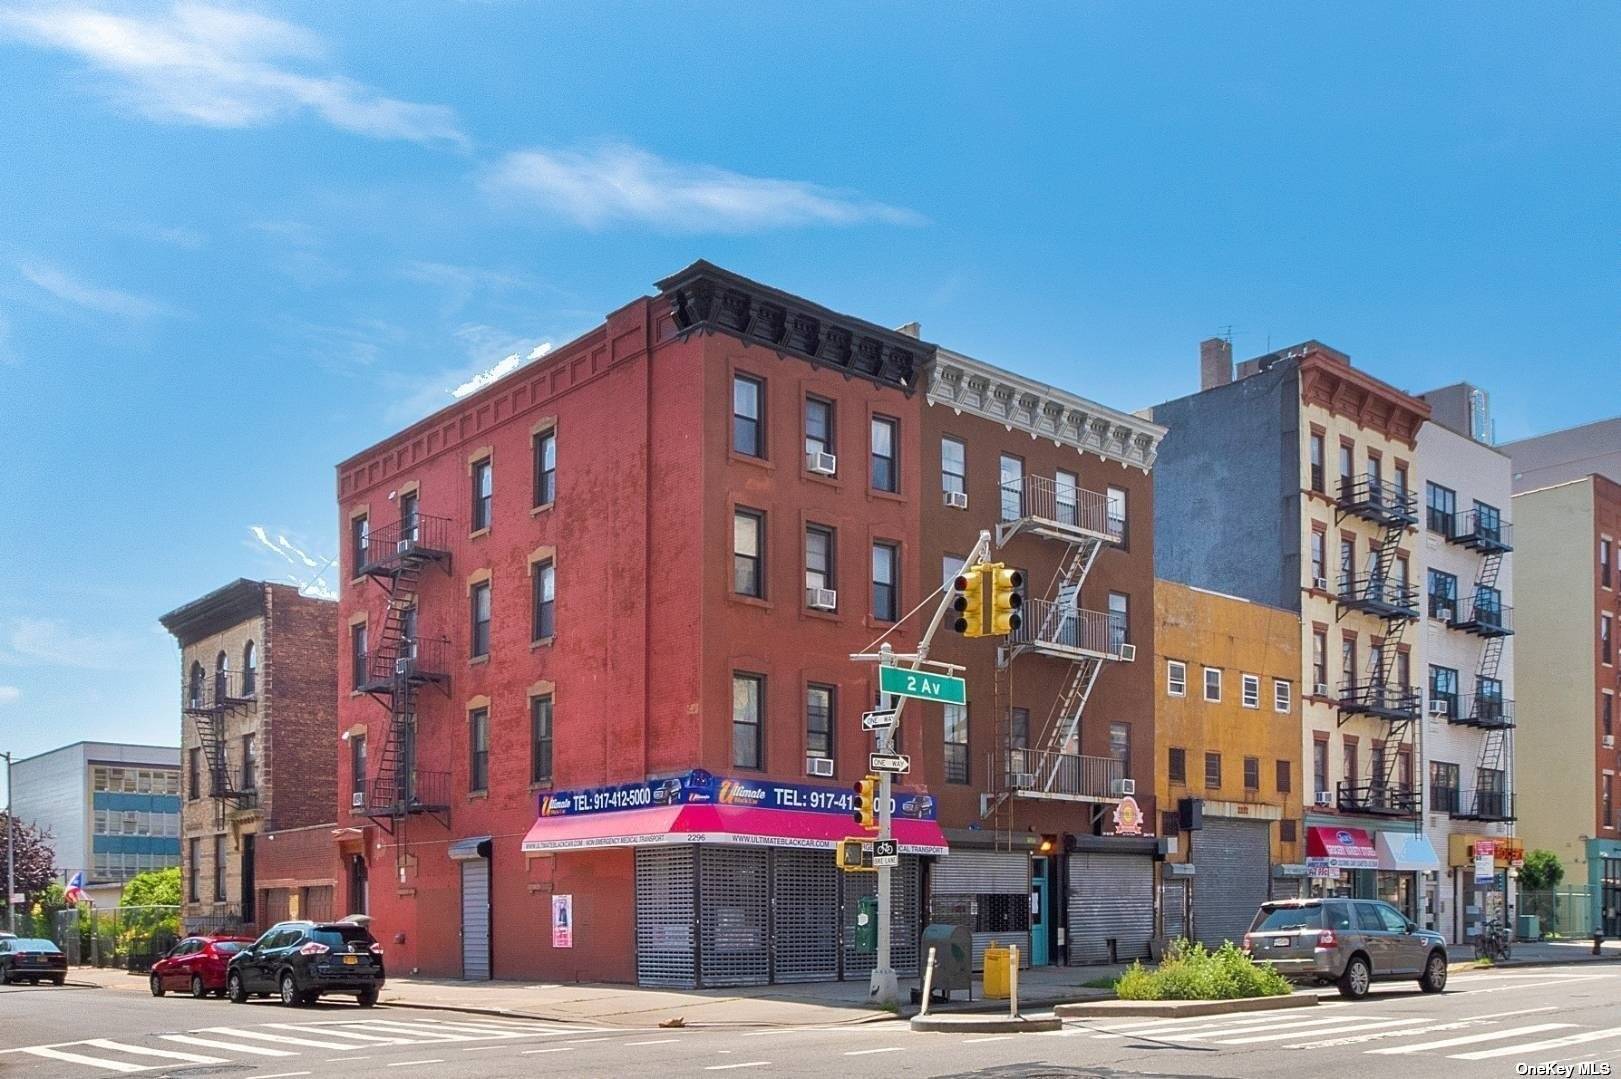 Don't miss this incredible opportunity in historic East Harlem !